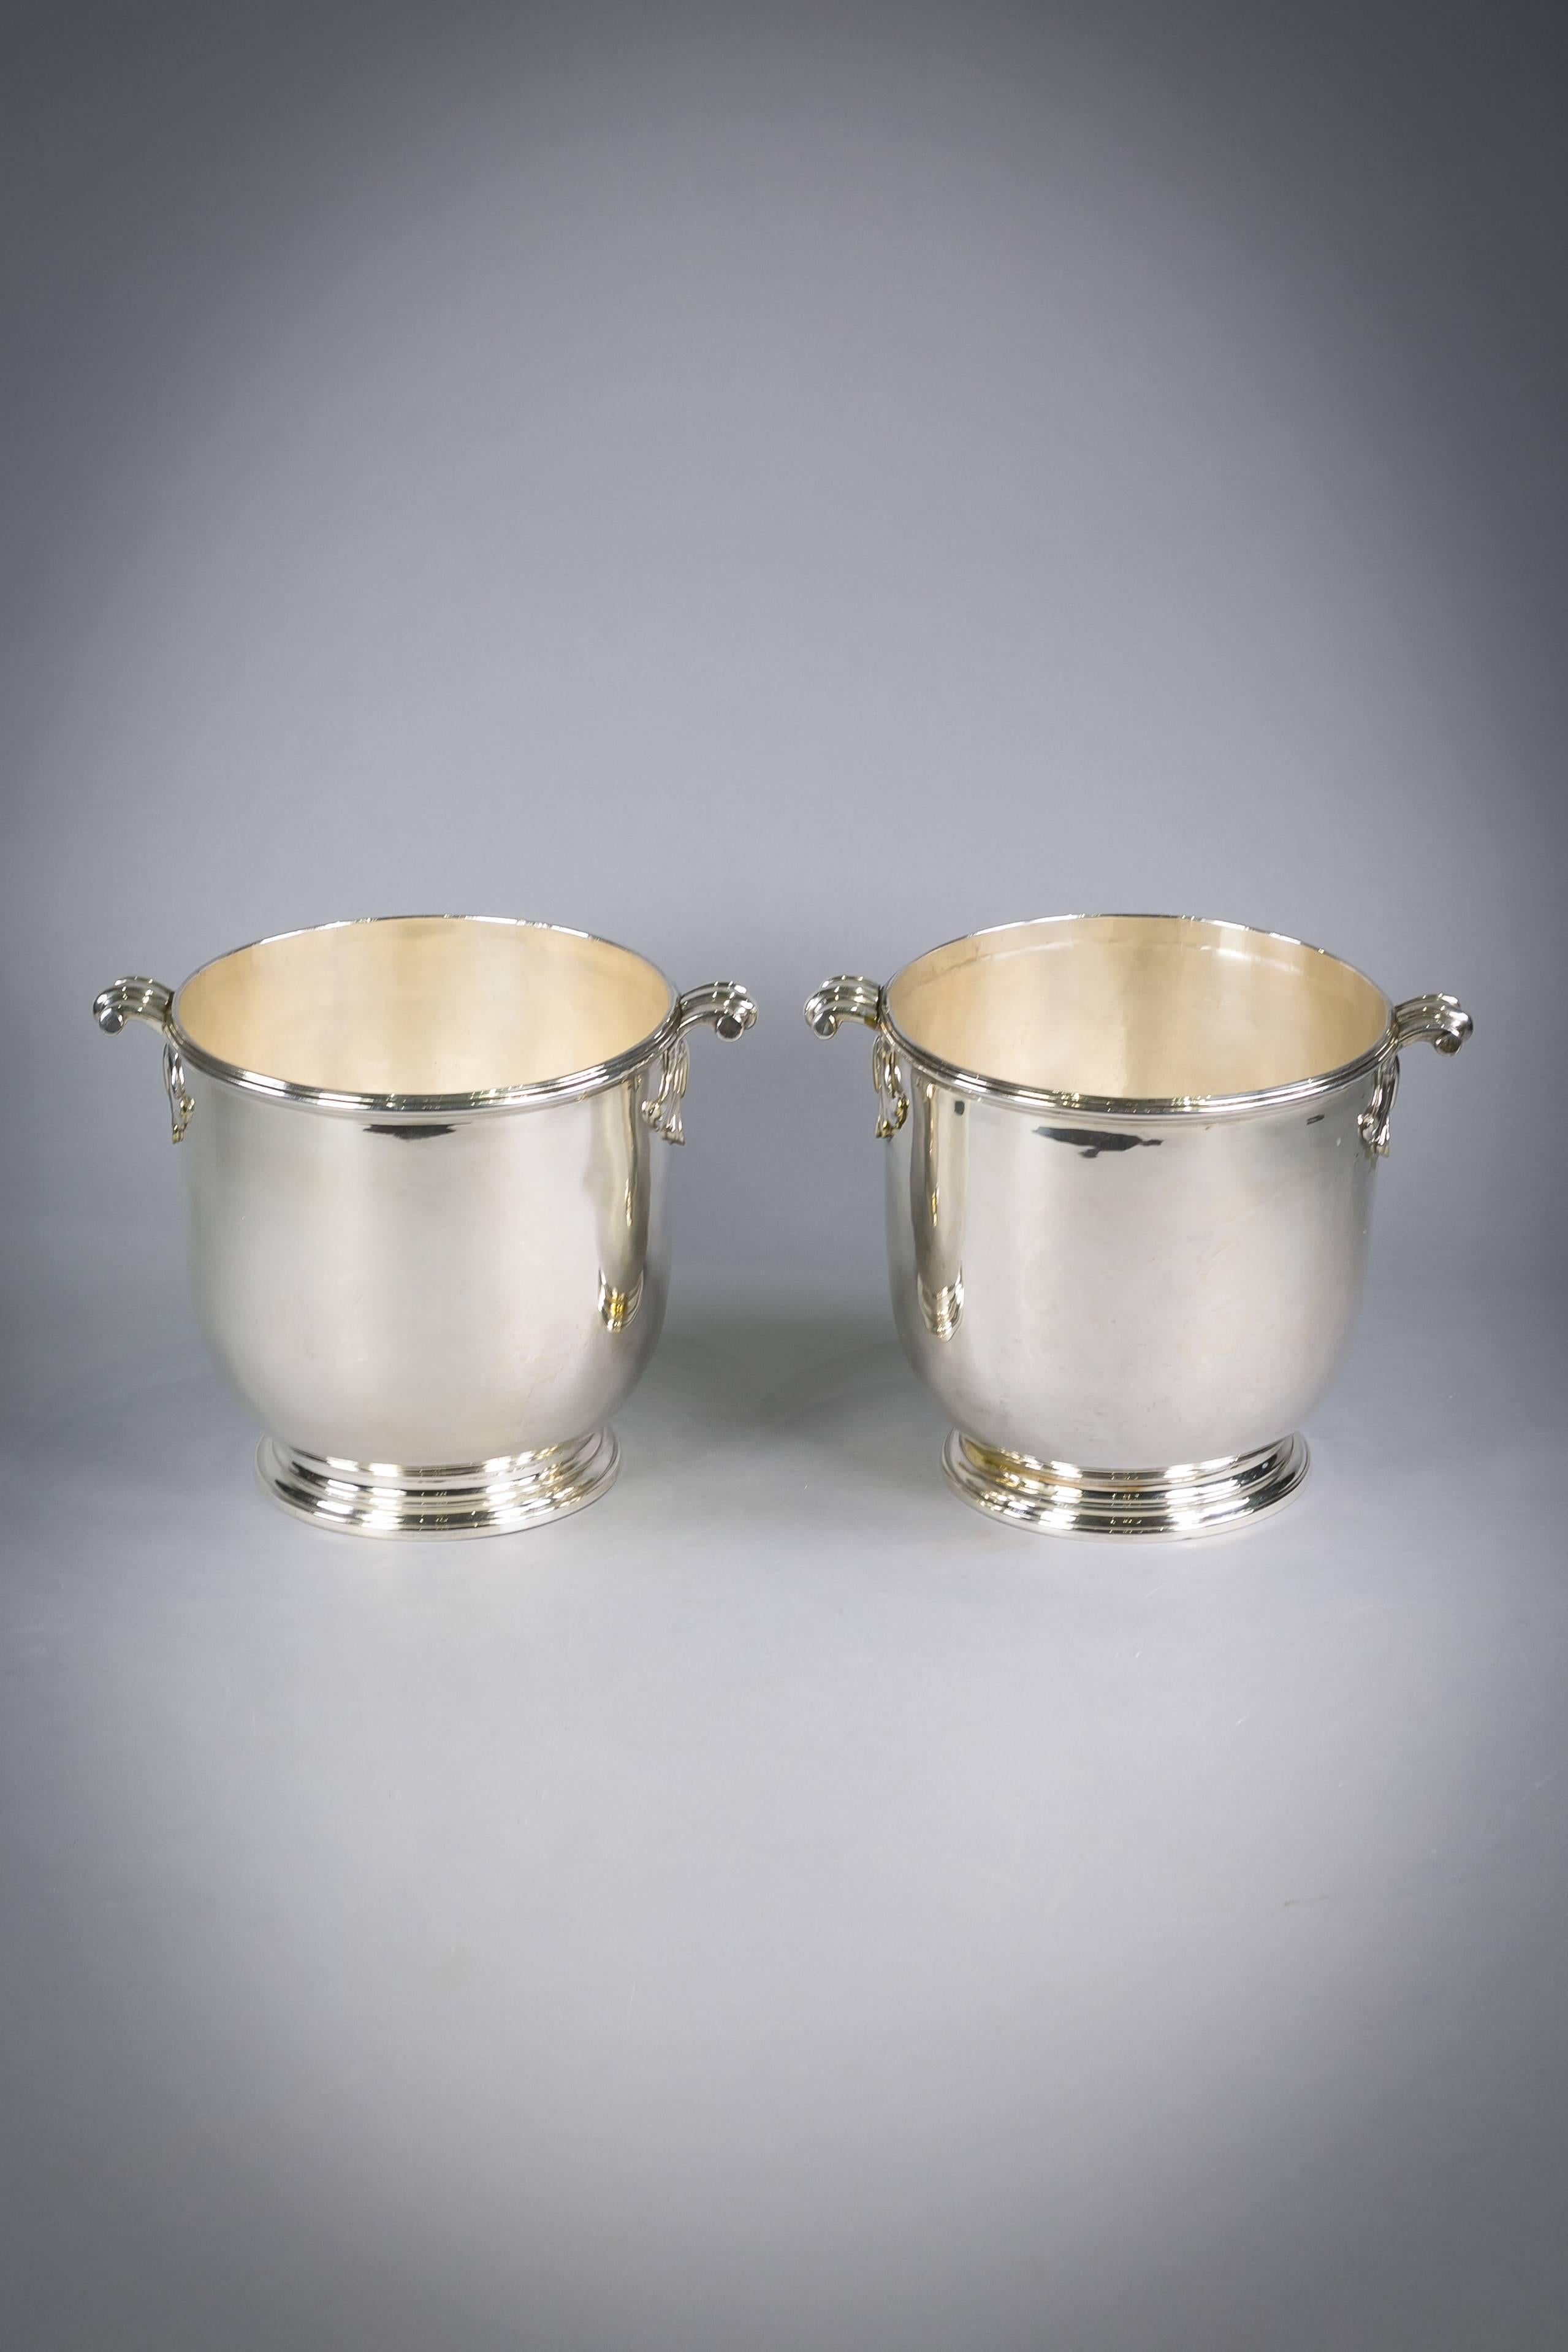 Pair of French silver plated wine coolers, circa 1880.